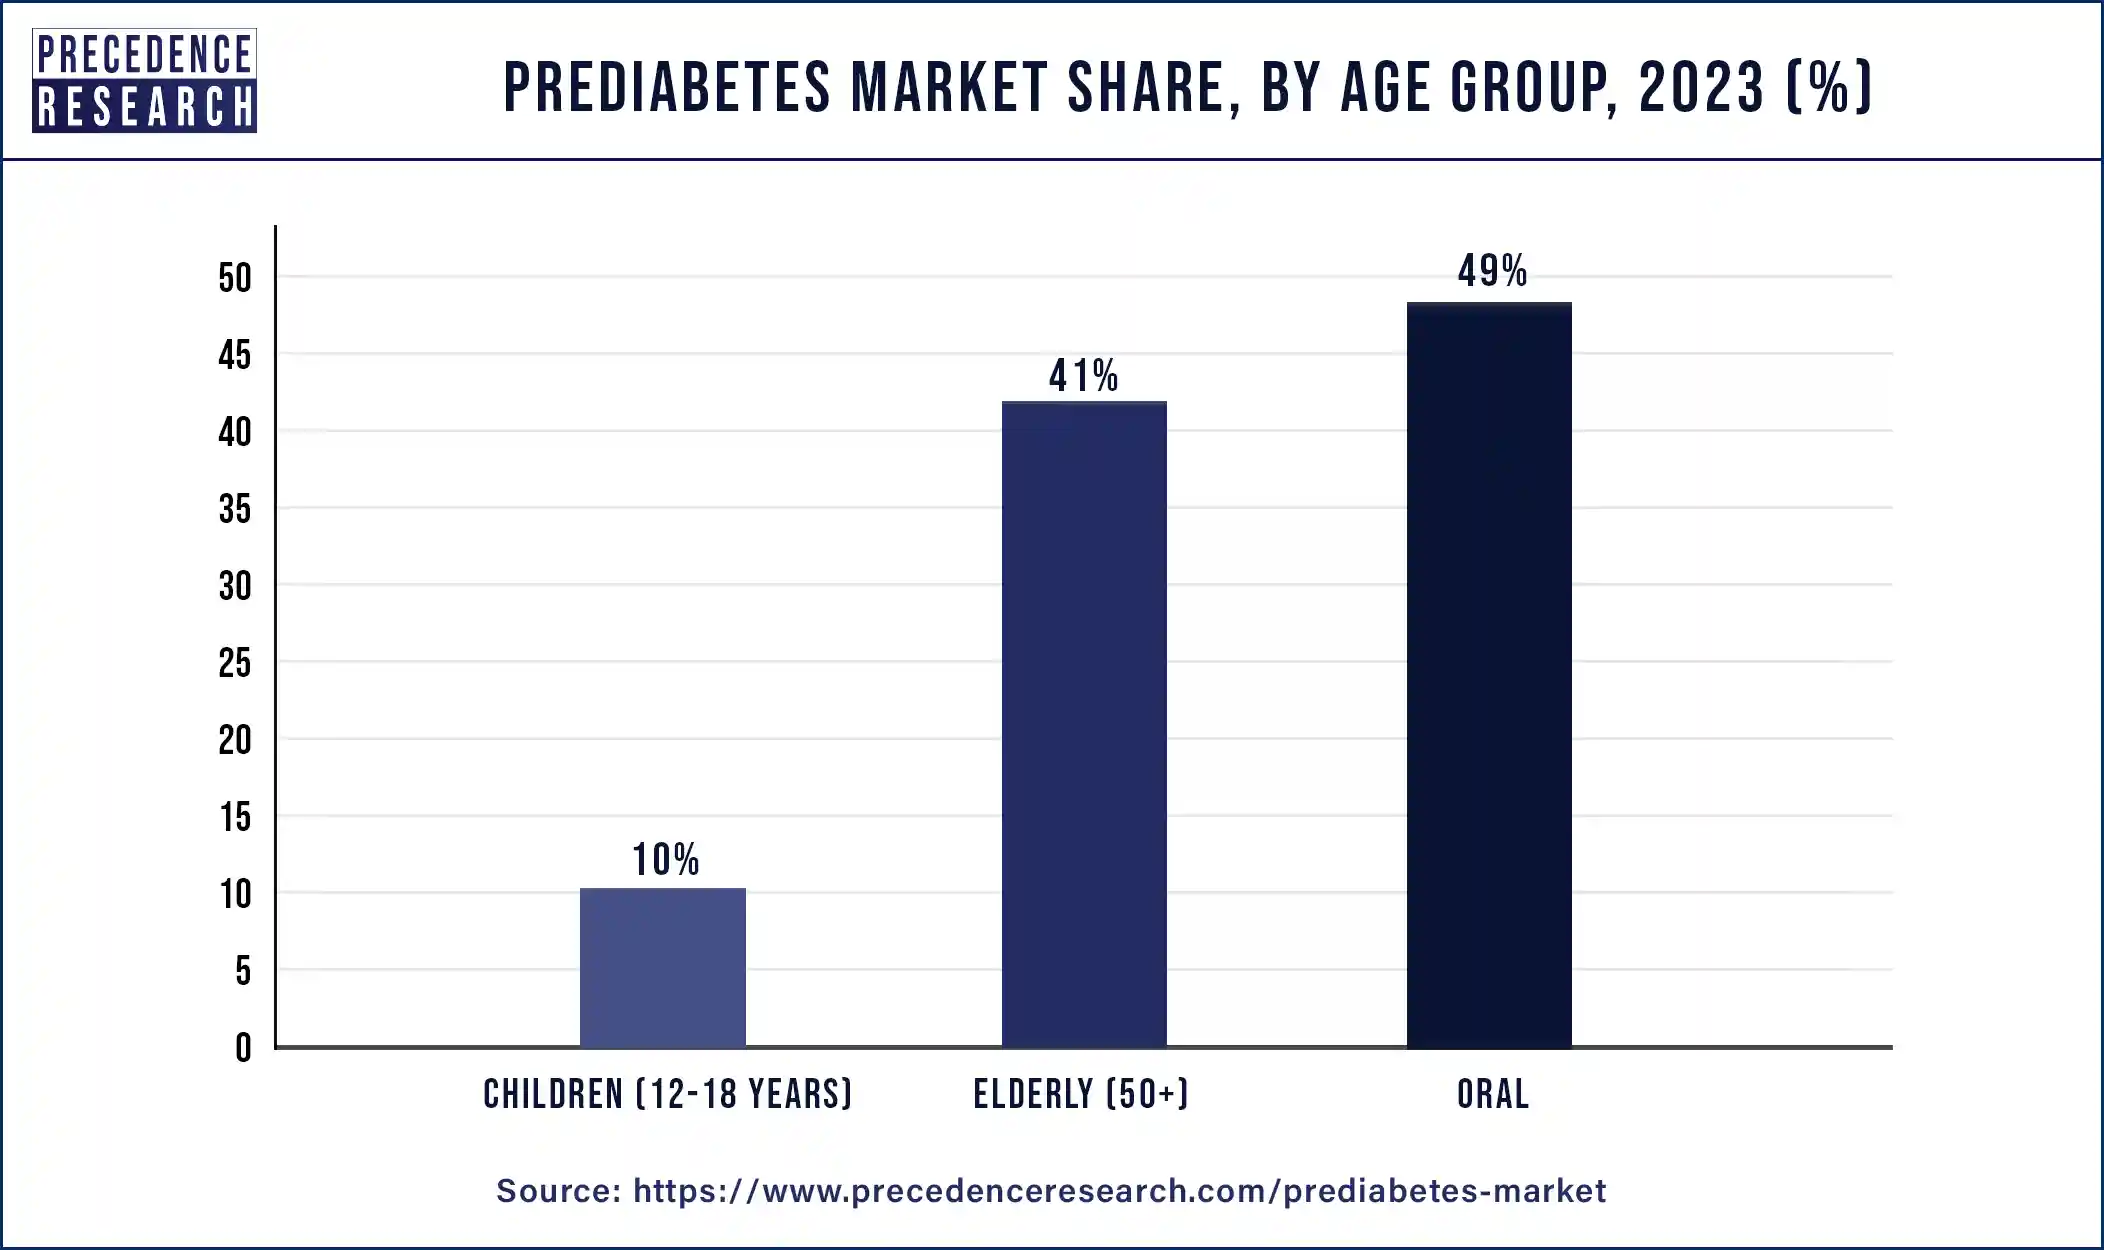 Prediabetes Market Share, By Age Group, 2023 (%)